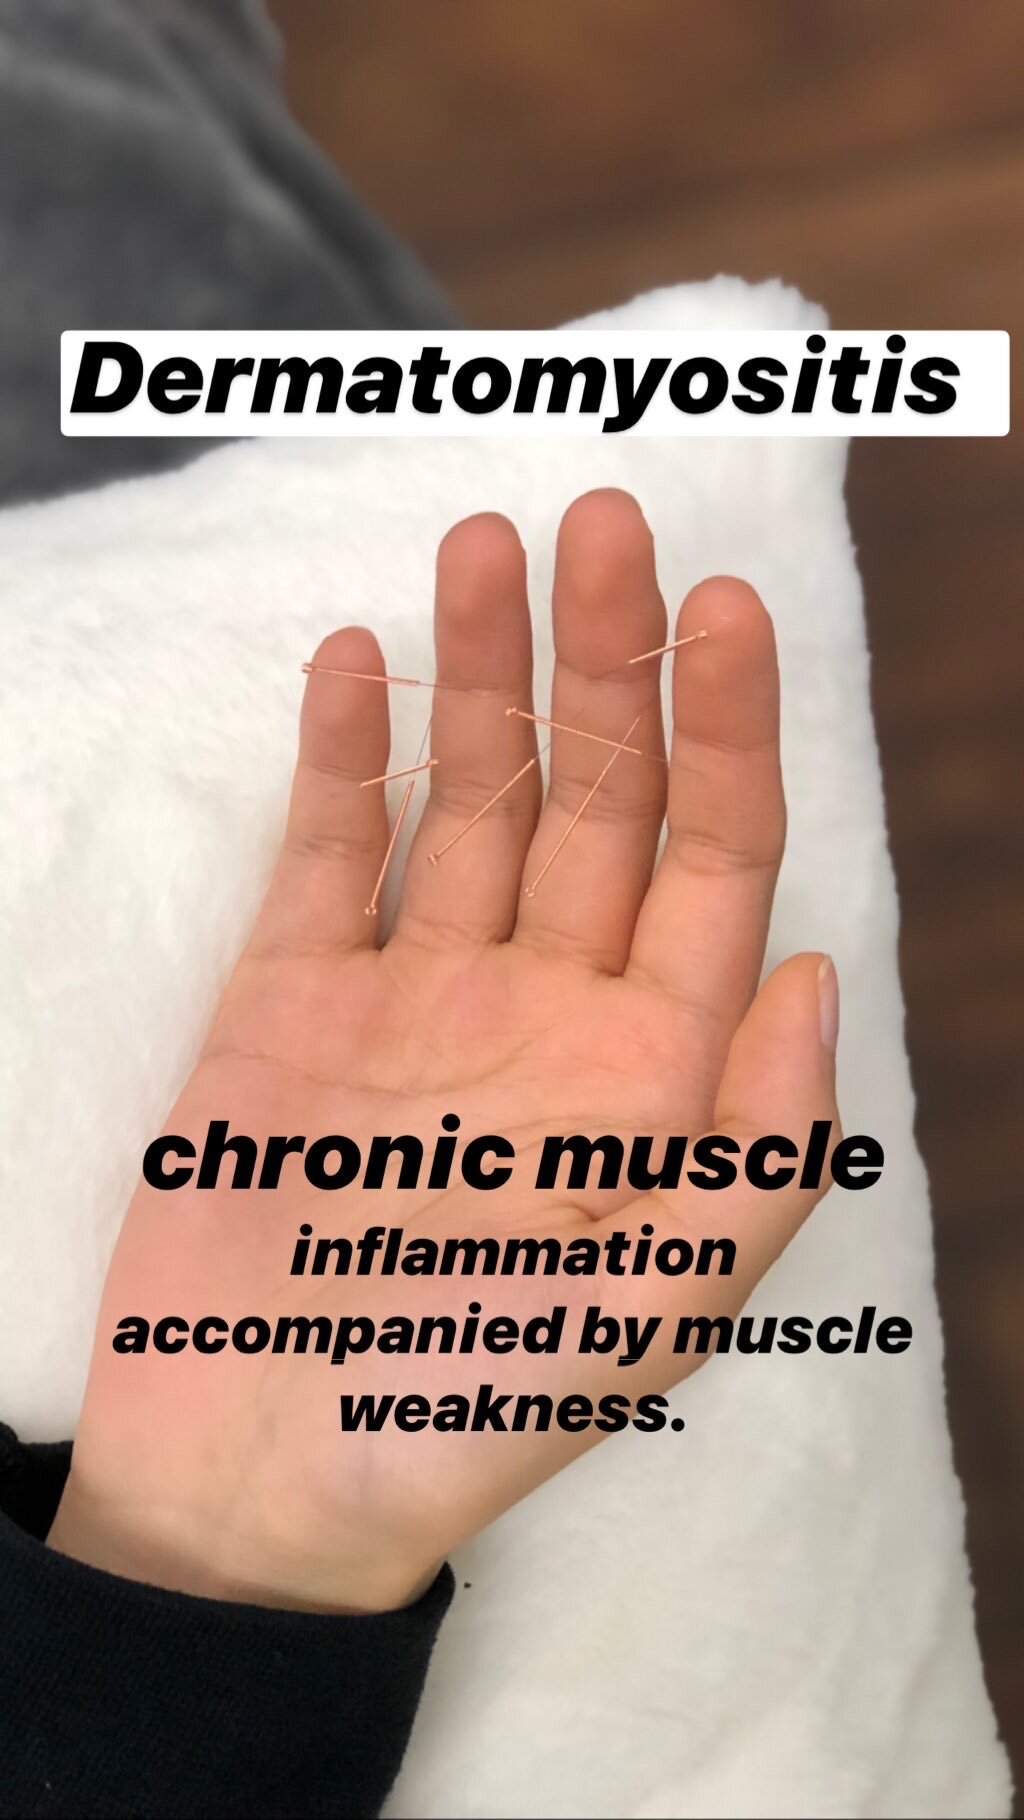  SuJok acupuncture in Vancouver used to treat skin diseases and conditions. Patient received treatment for dermatomyositis causing chronic muscle inflammation and weakness.  